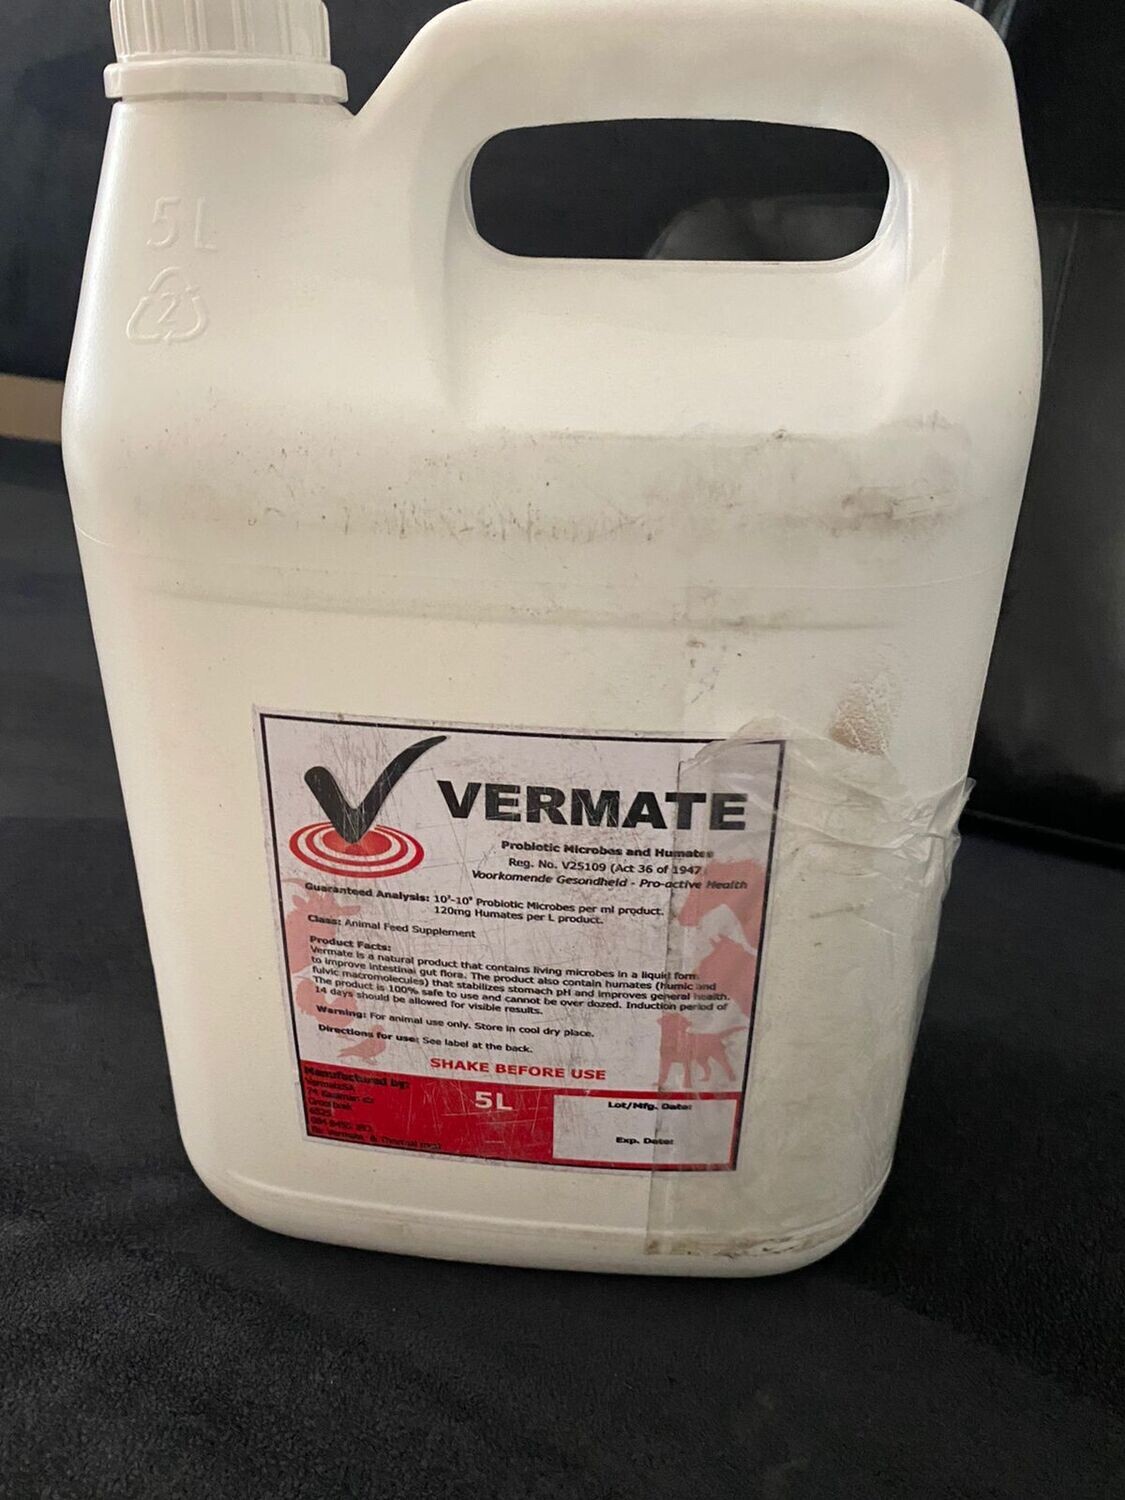 Vermate and Vermate Concentrate